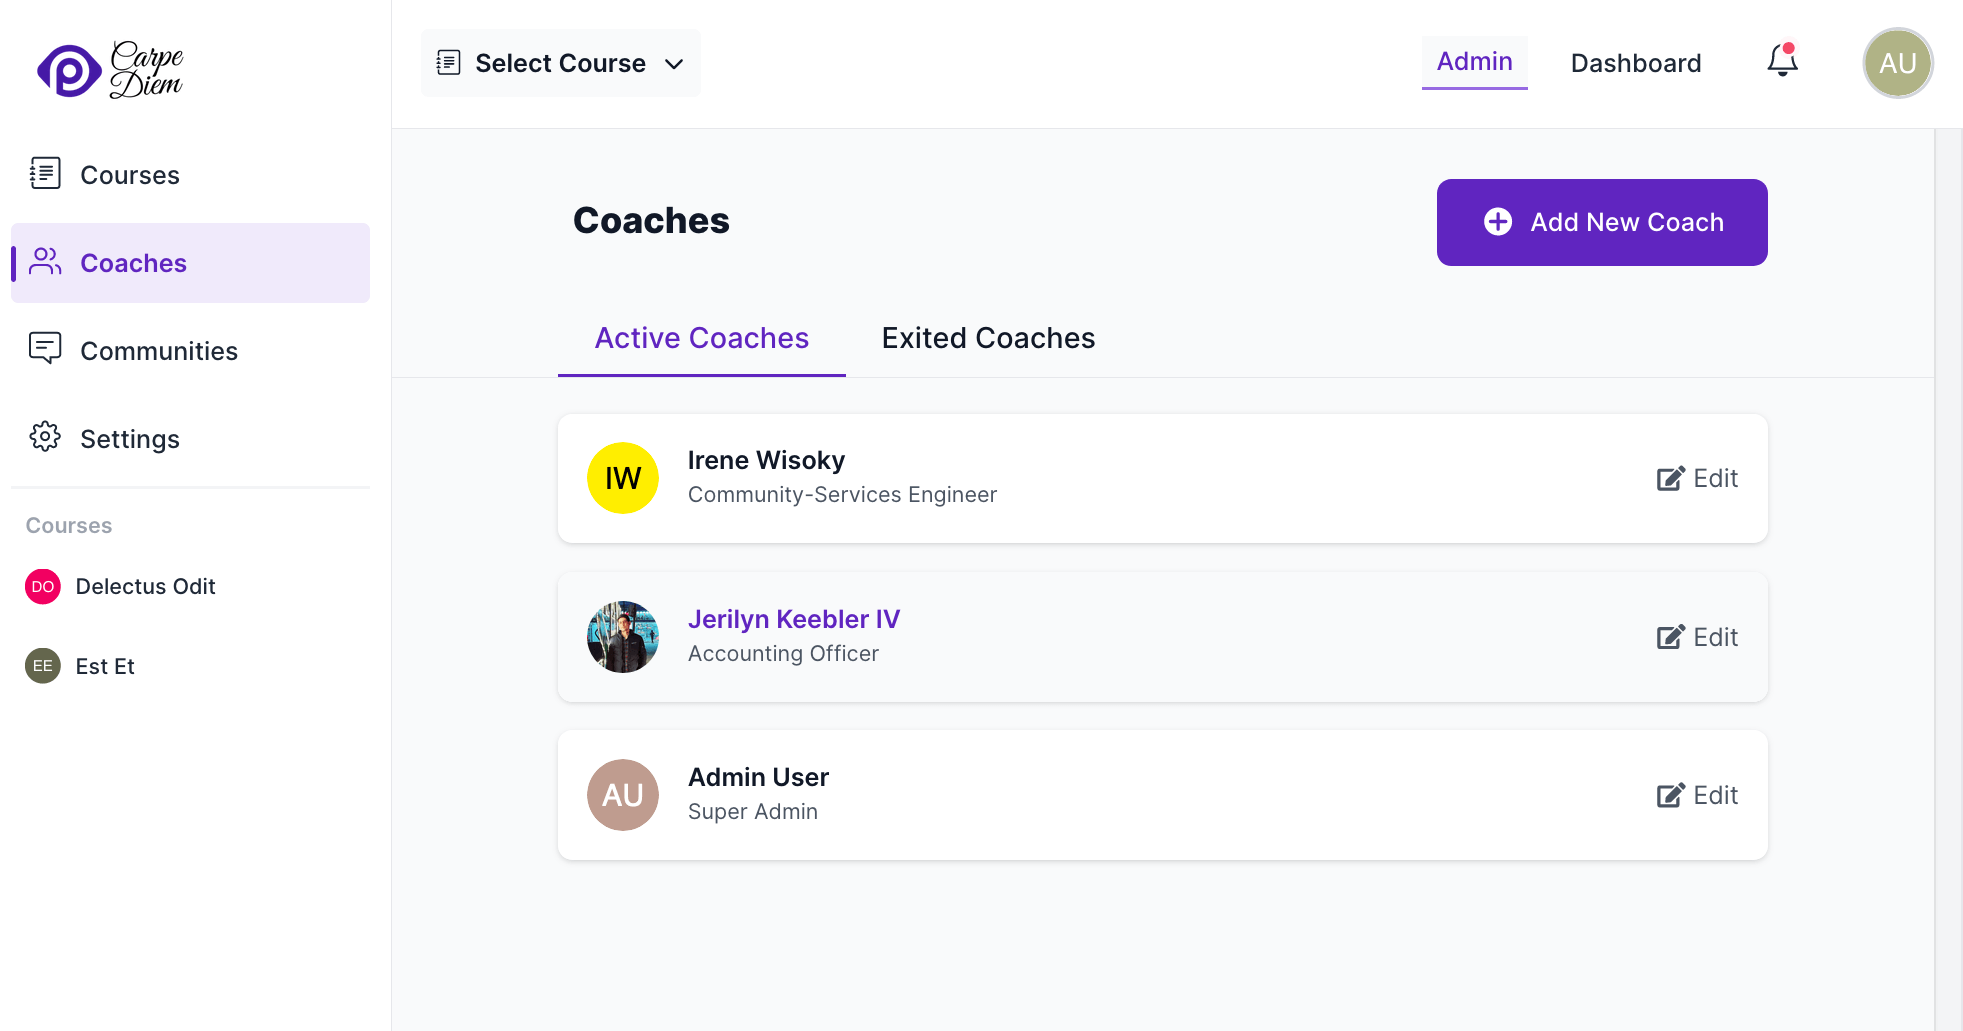 Coaches page in school administration interface